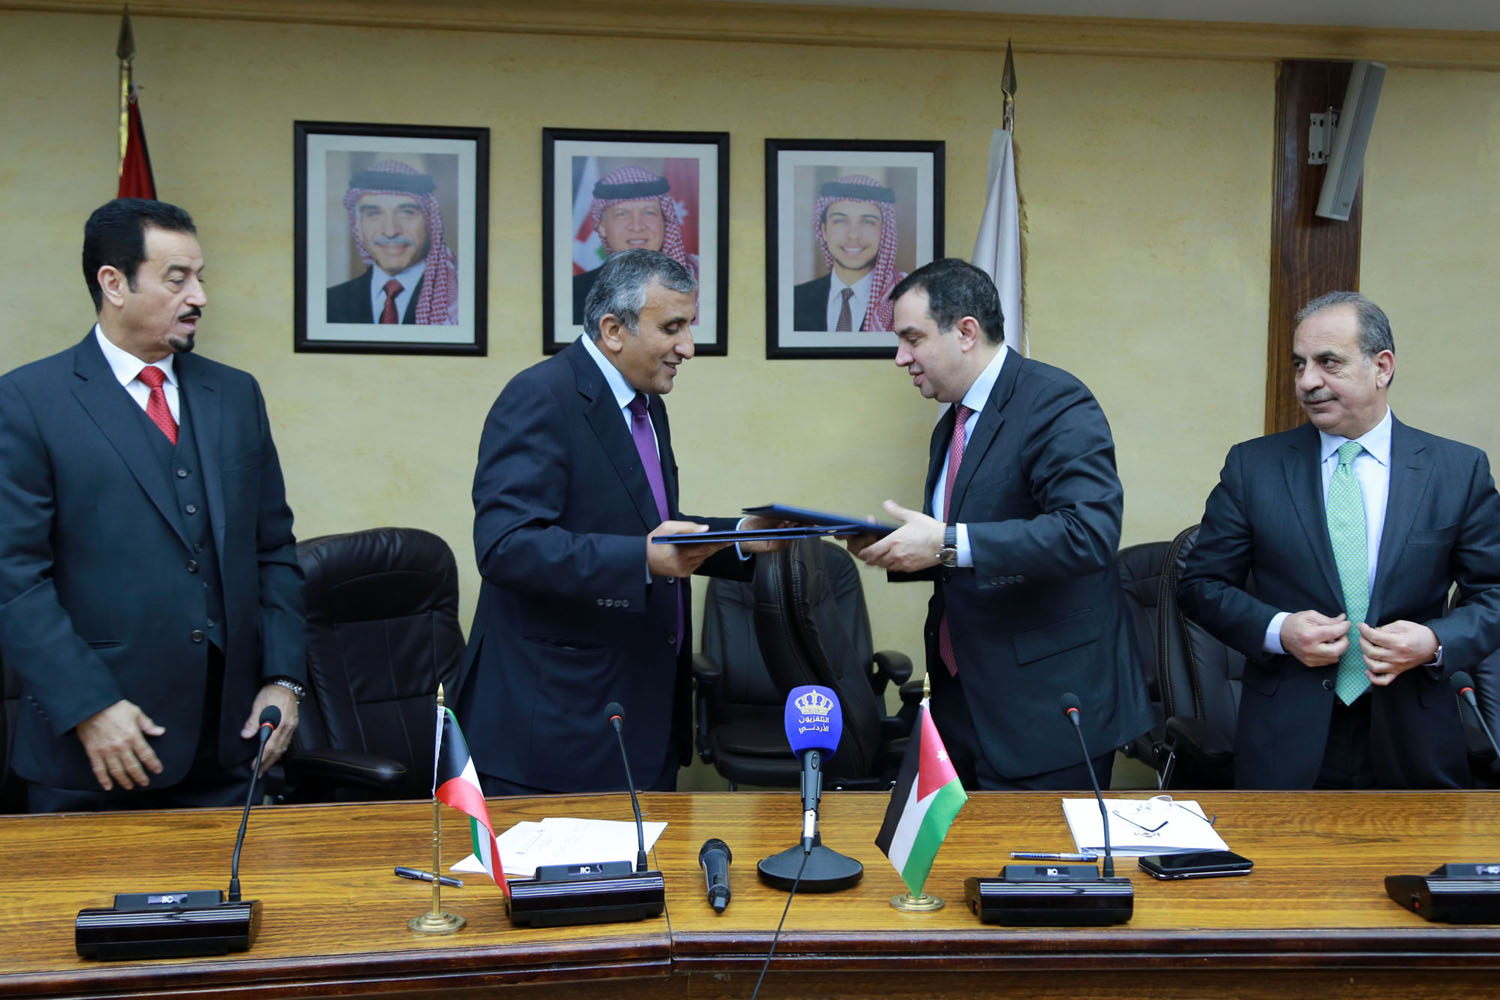 Signing of a grant agreement in Amman between Kuwait Fund for Arab Economic Development (KFAED) and the Jordanian government